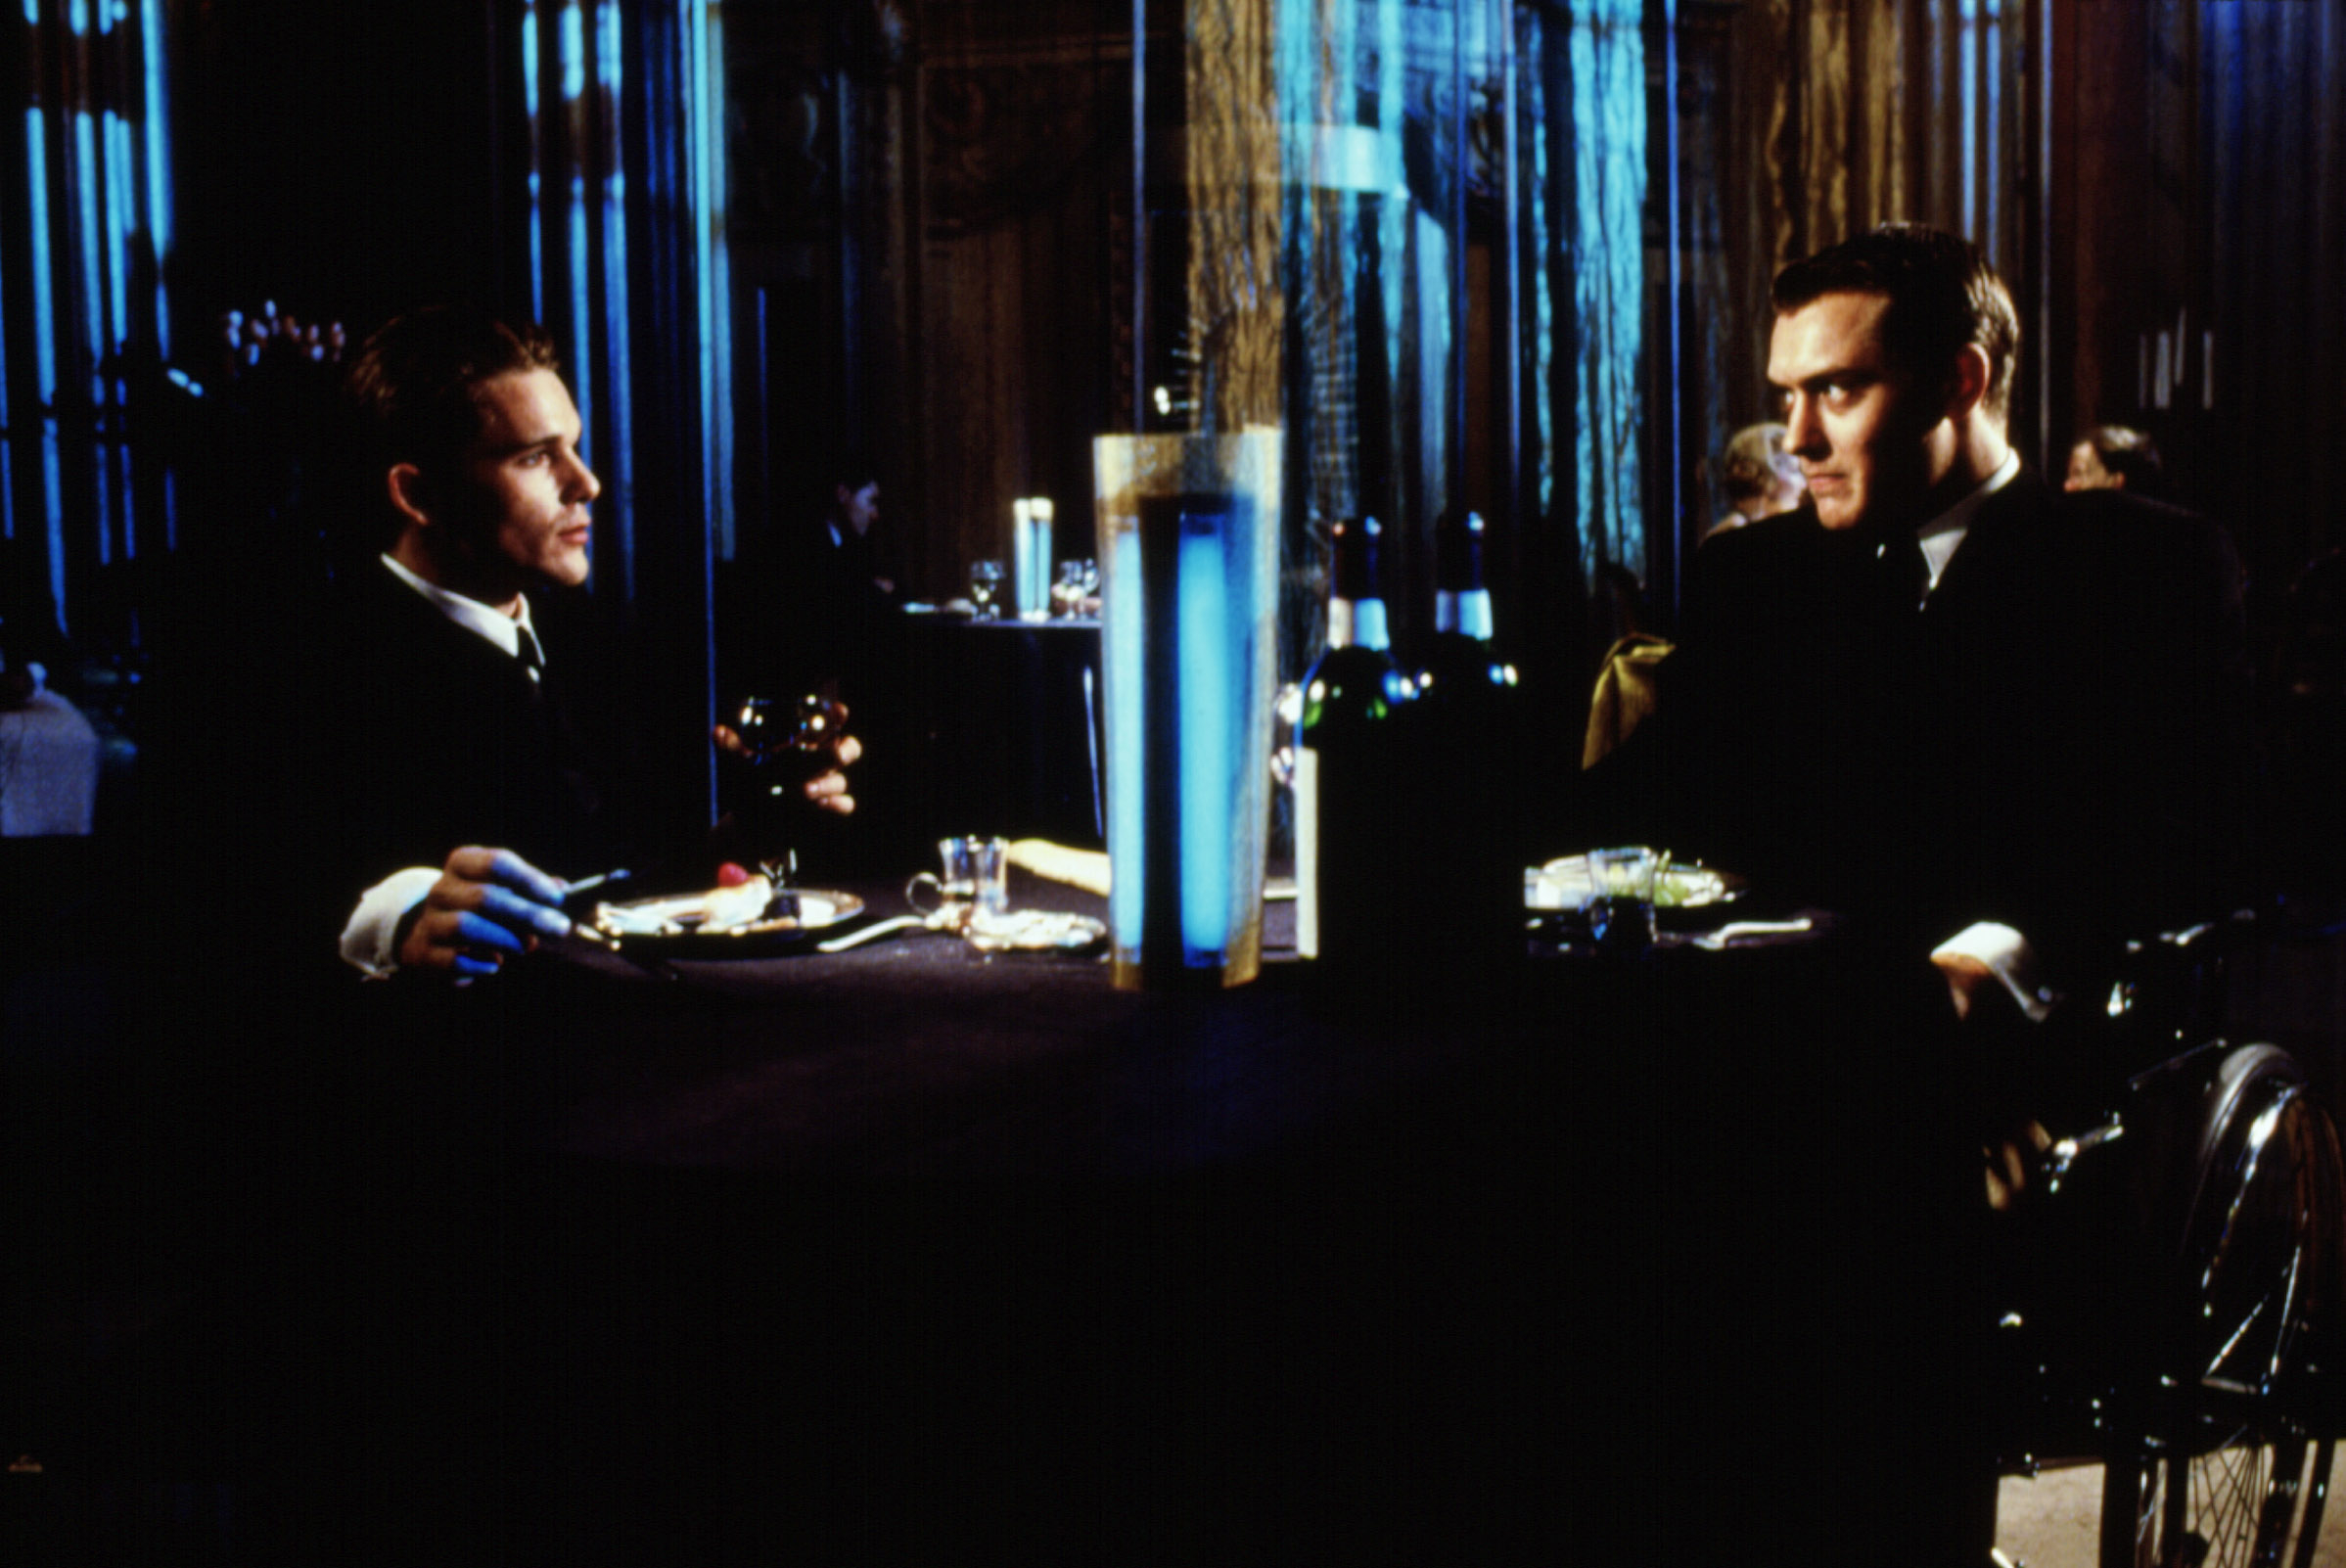 Two characters in formal attire sit at a dining table in a scene from a film